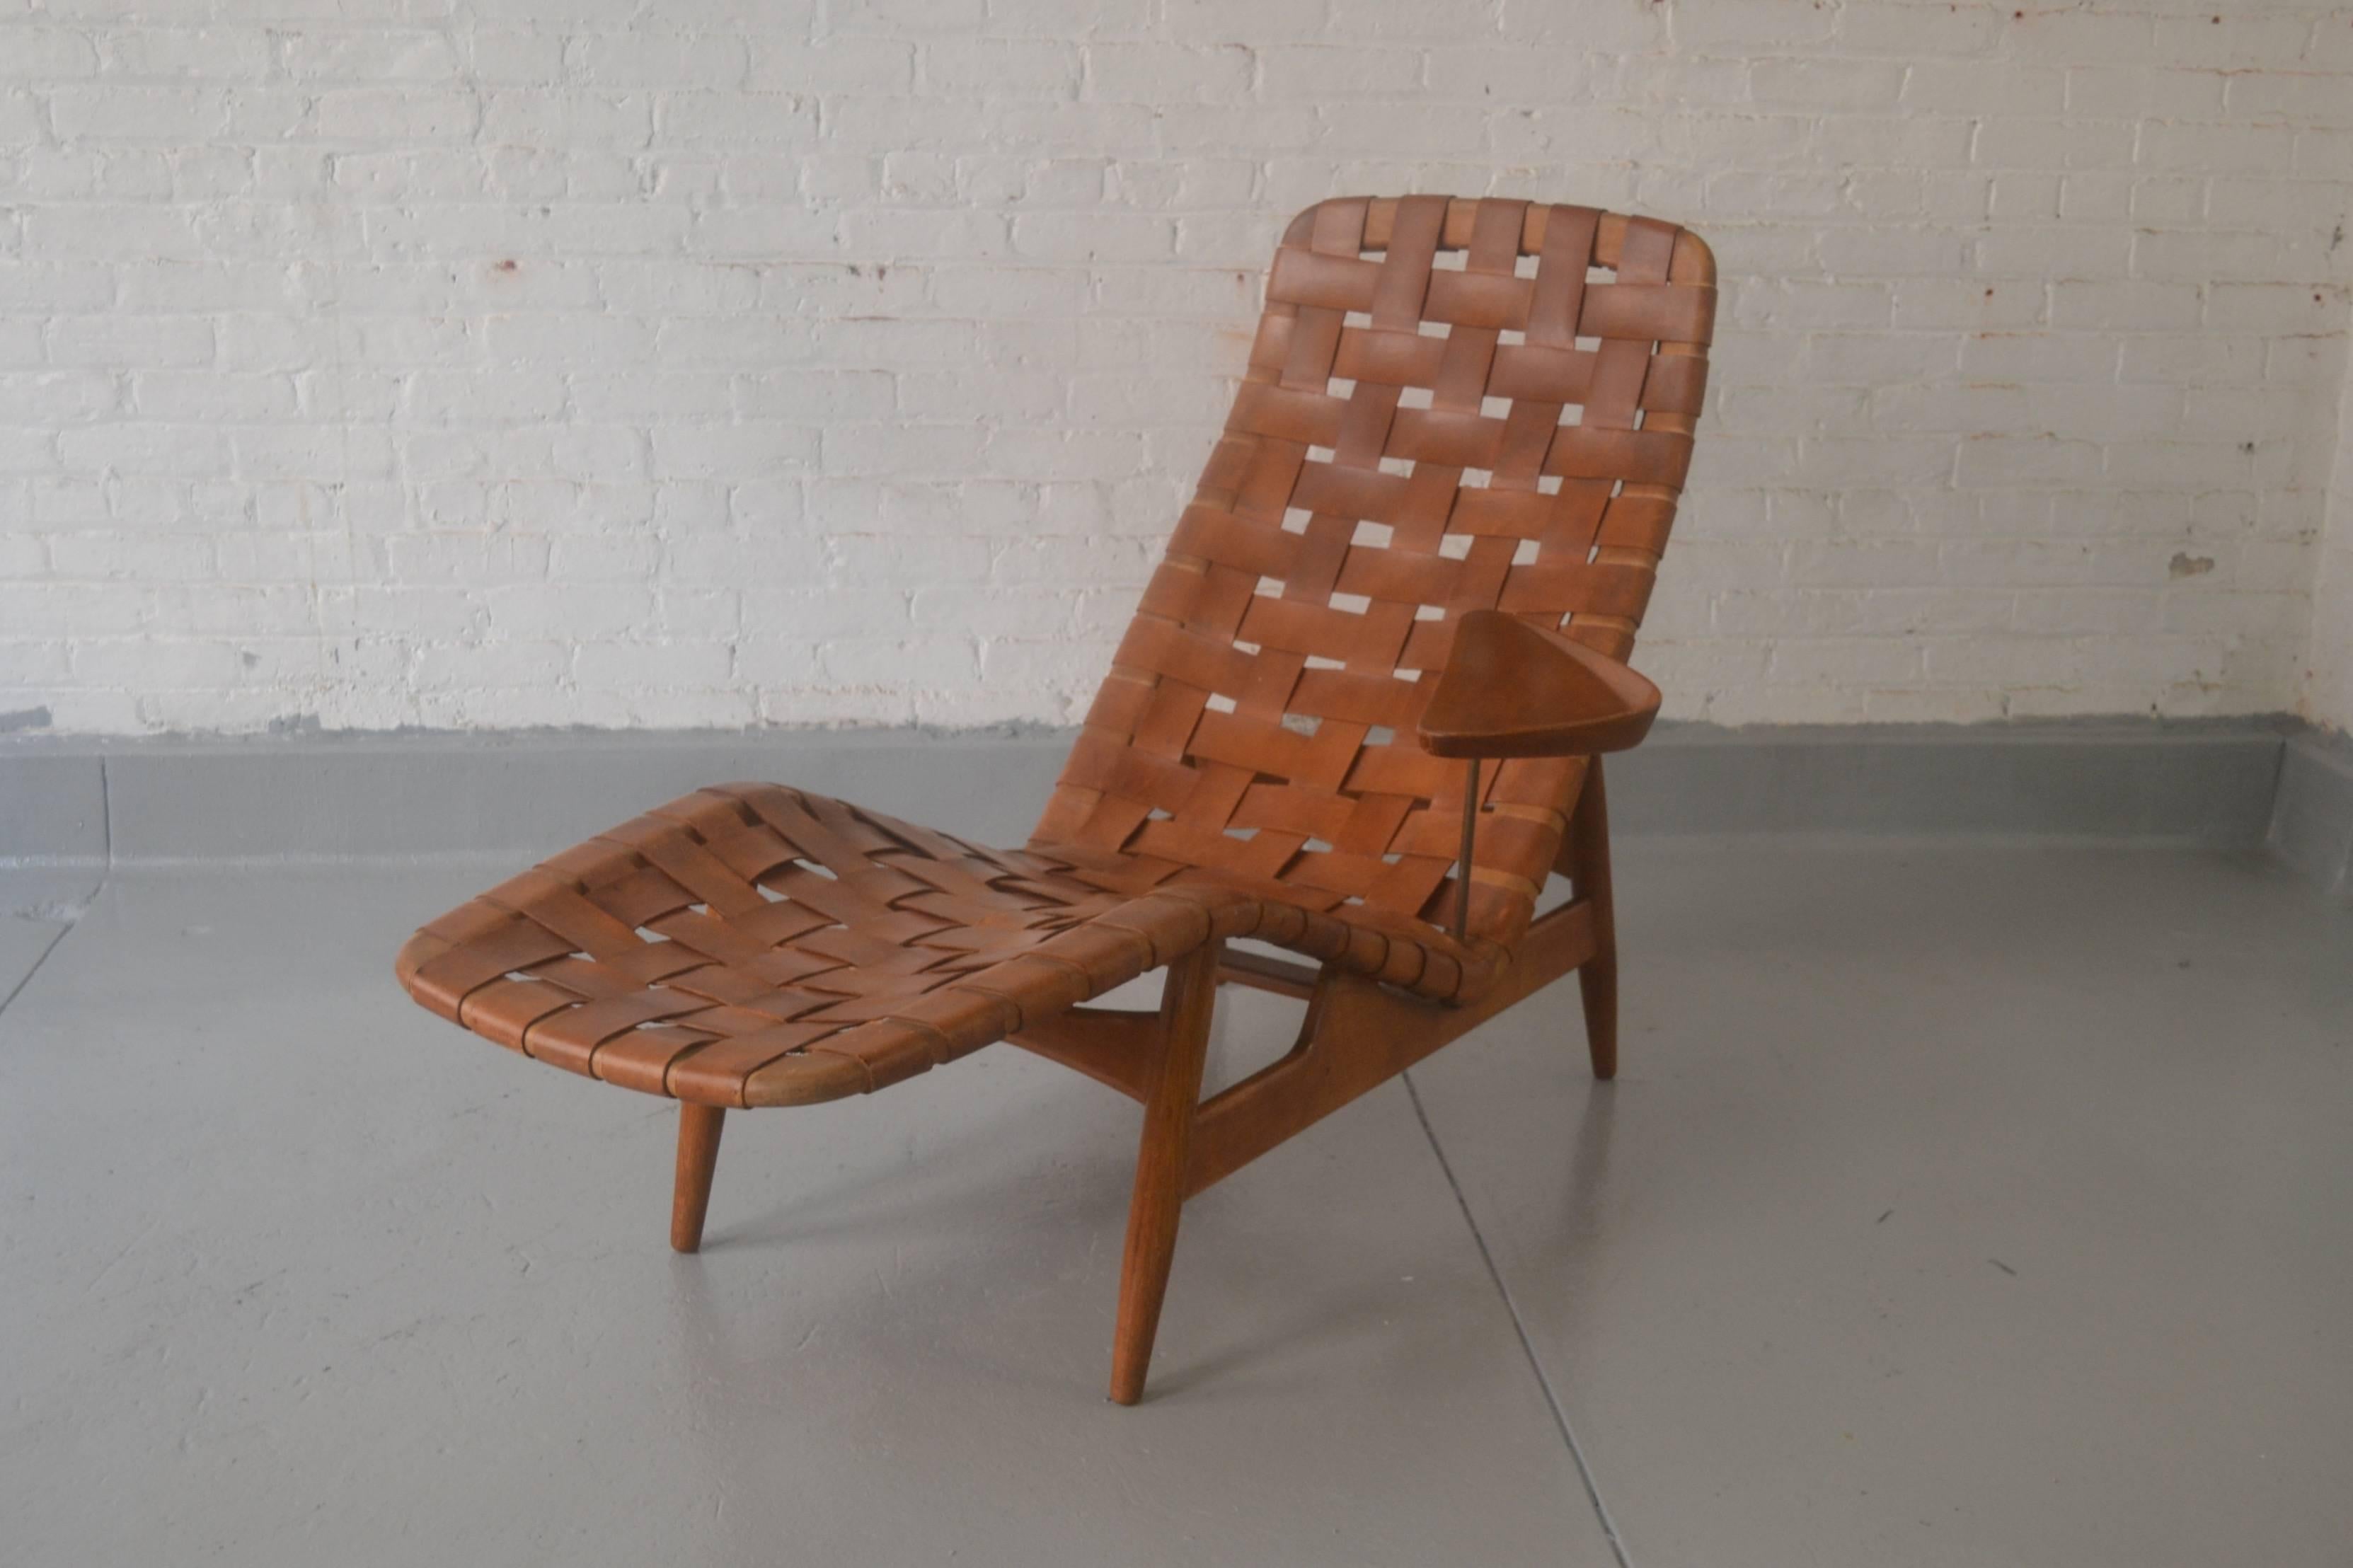 Rare sculptural chaise lounge by Arne Vodder, Denmark, 1950s. Original leather strapping with beautiful patina on teak frame with original tray table. Excellent condition with normal signs of wear.

Measures: 38 in. H x 54 in. W x 22 in. D.
Seat: